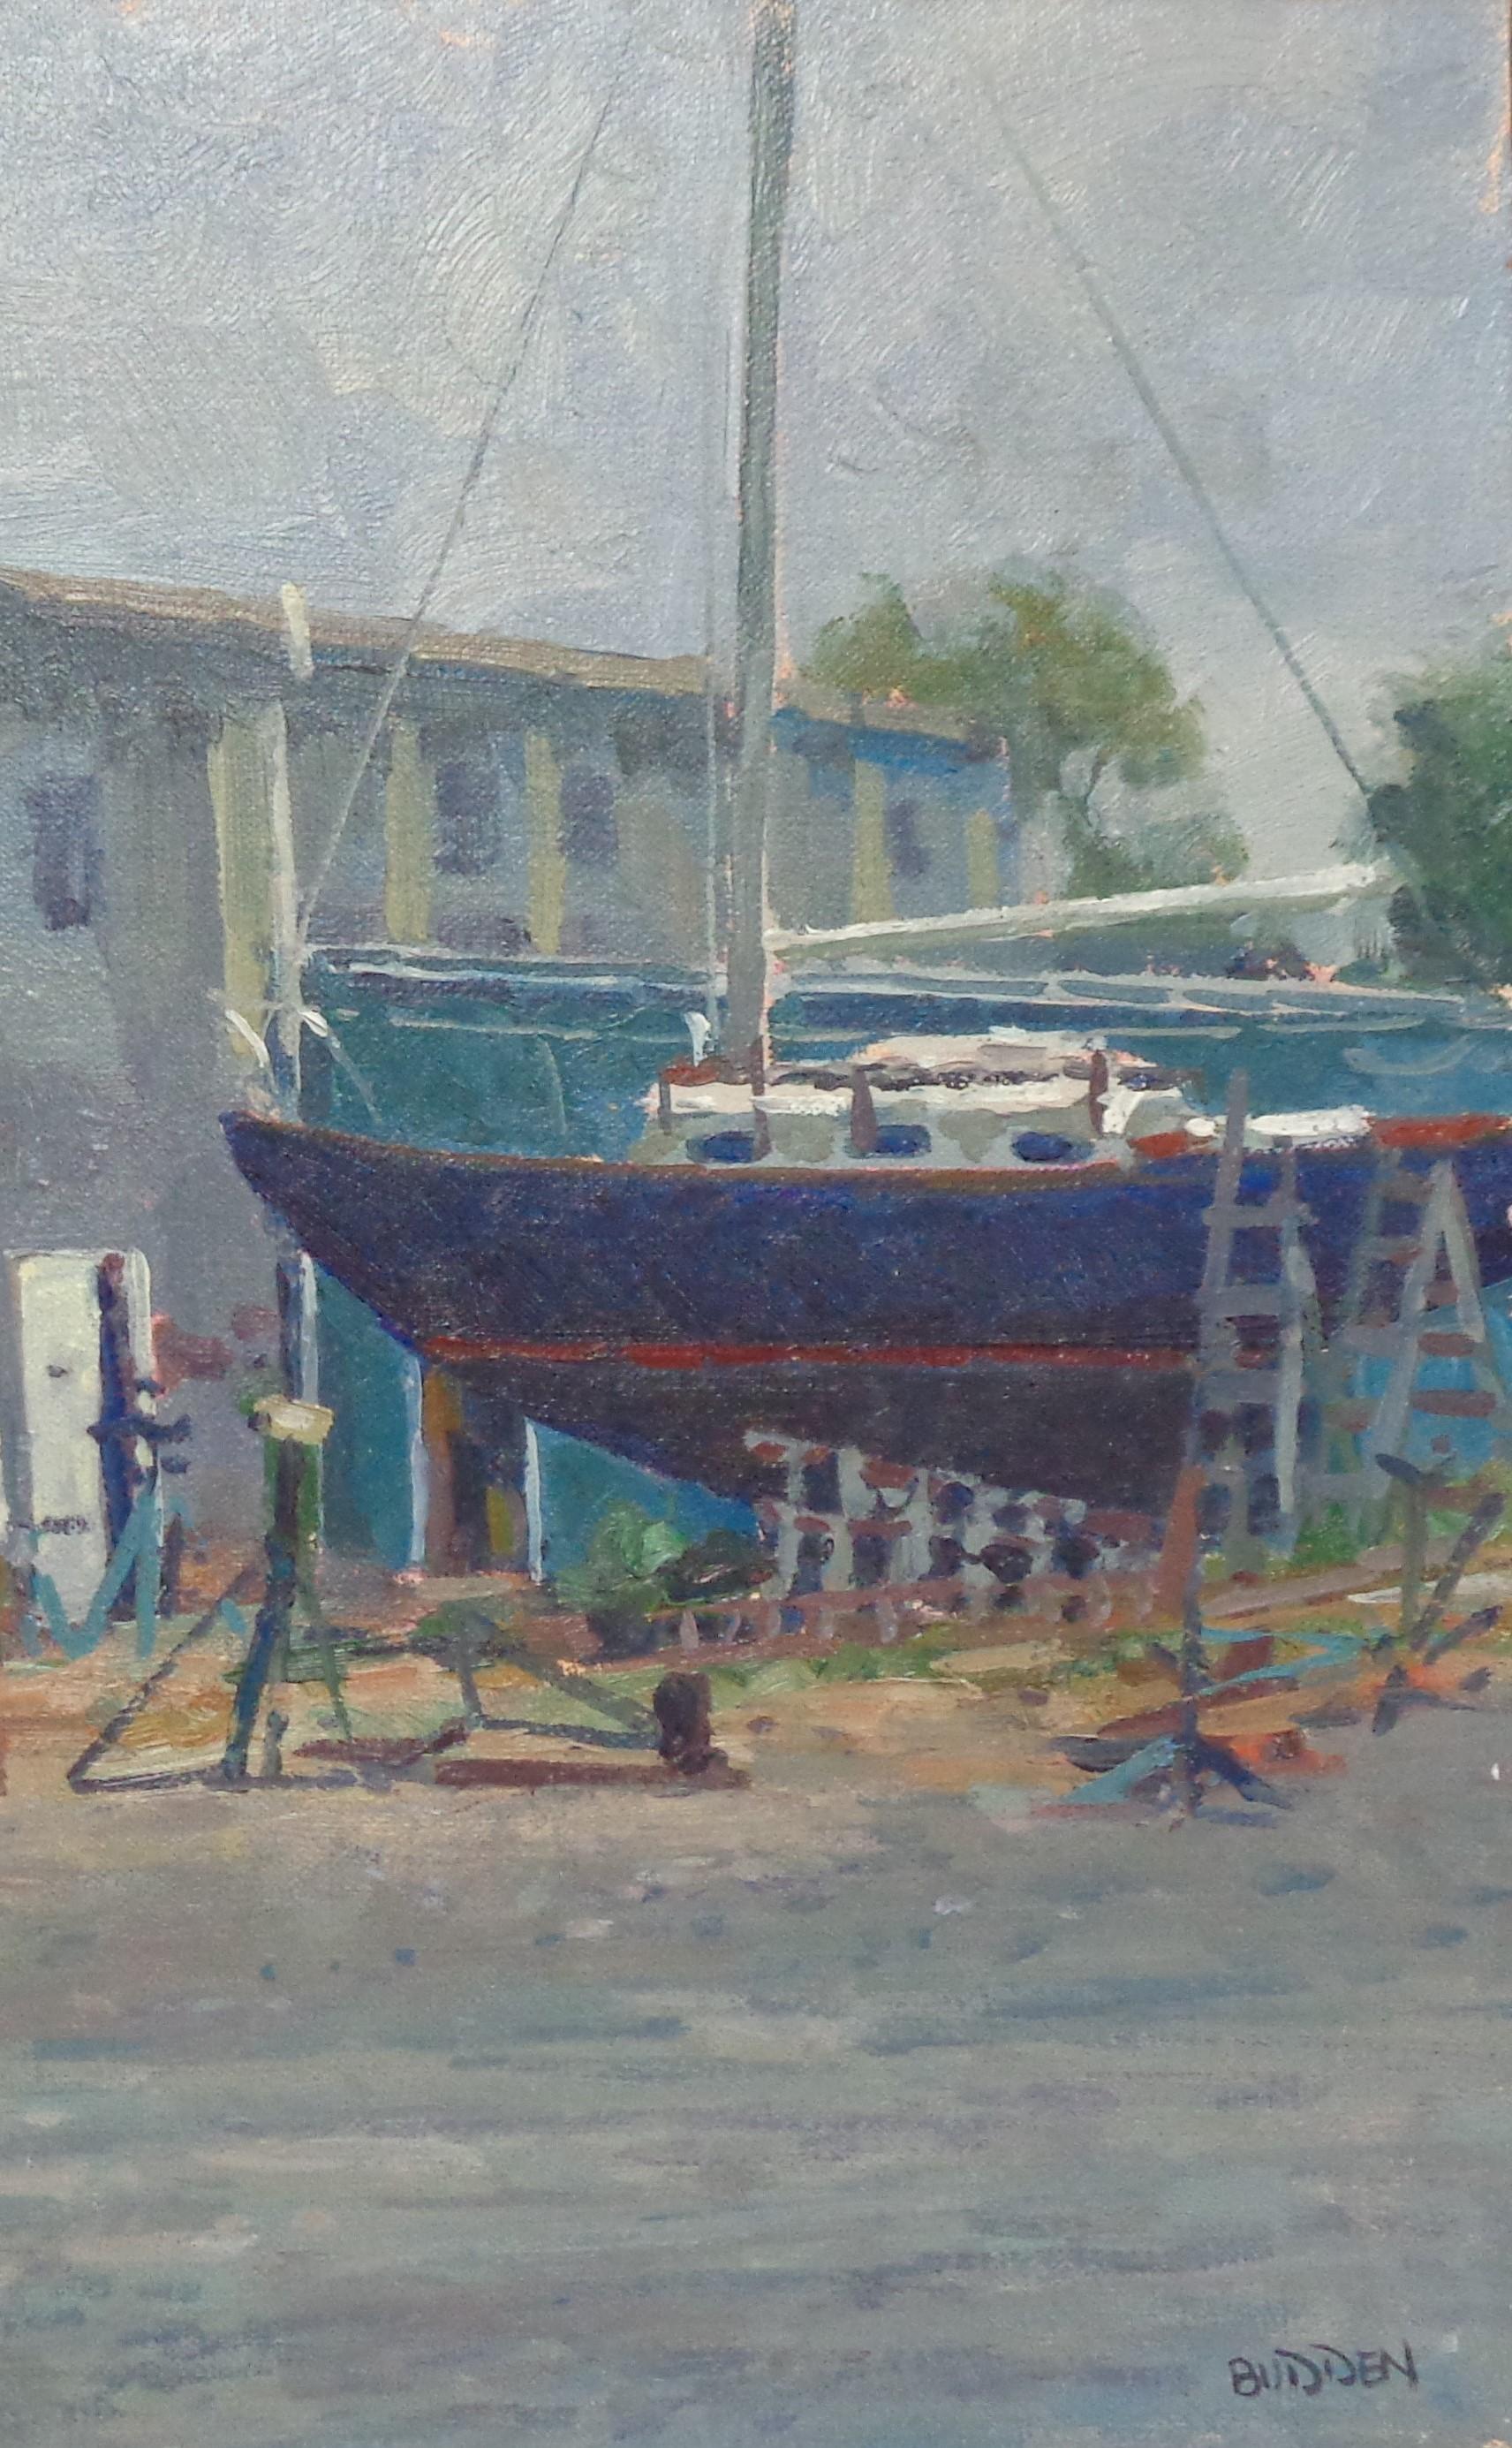 Boat Impressionistic Seascape Painting Michael Budden Lowerys Tilghman Island Md For Sale 2